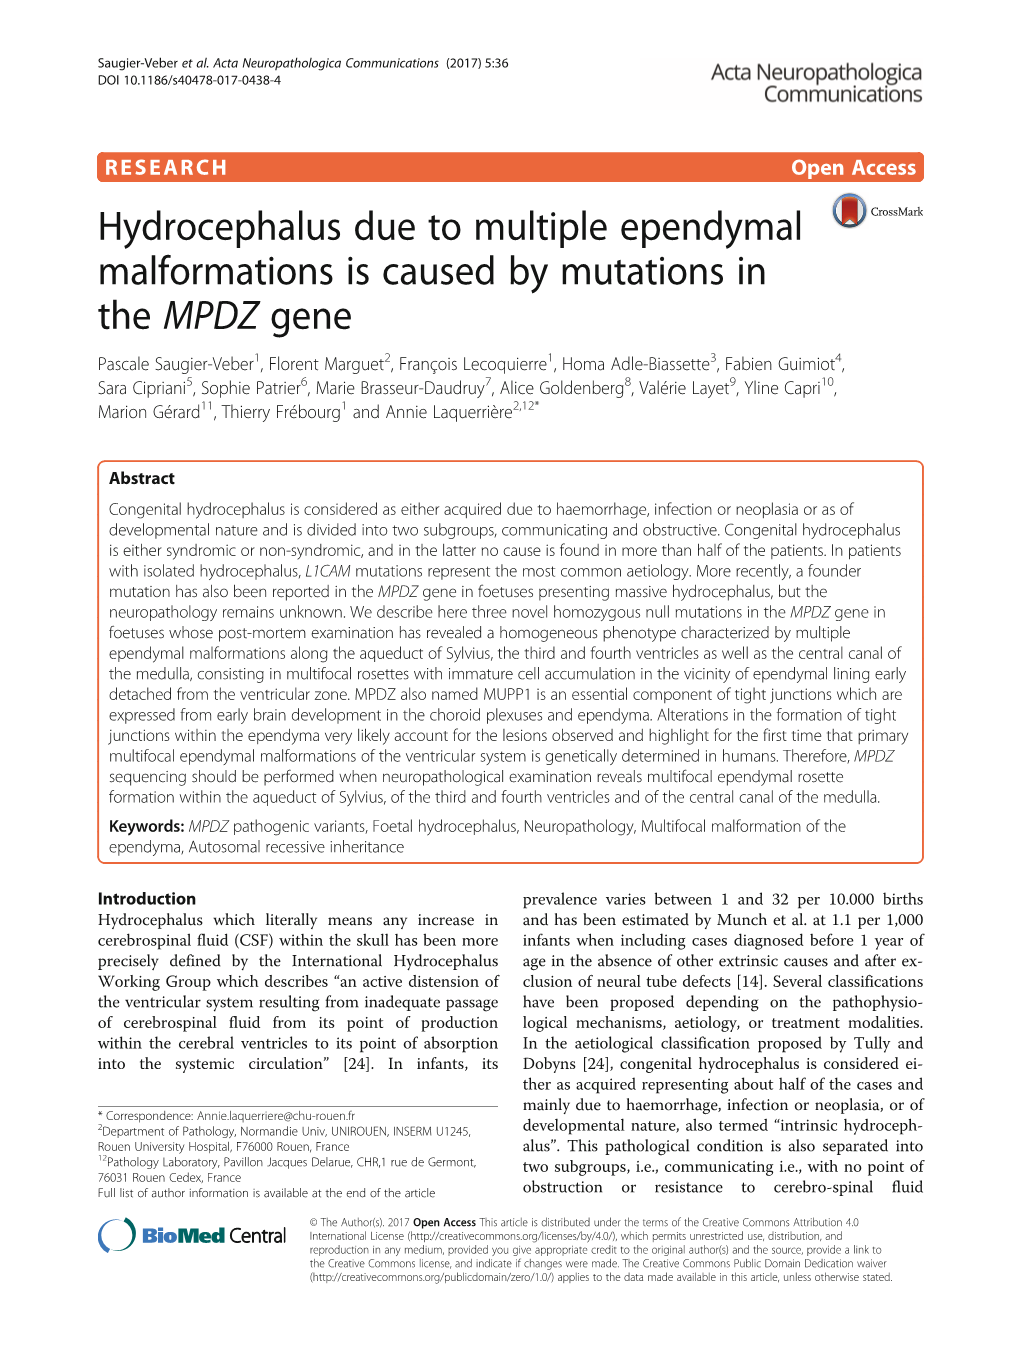 Hydrocephalus Due to Multiple Ependymal Malformations Is